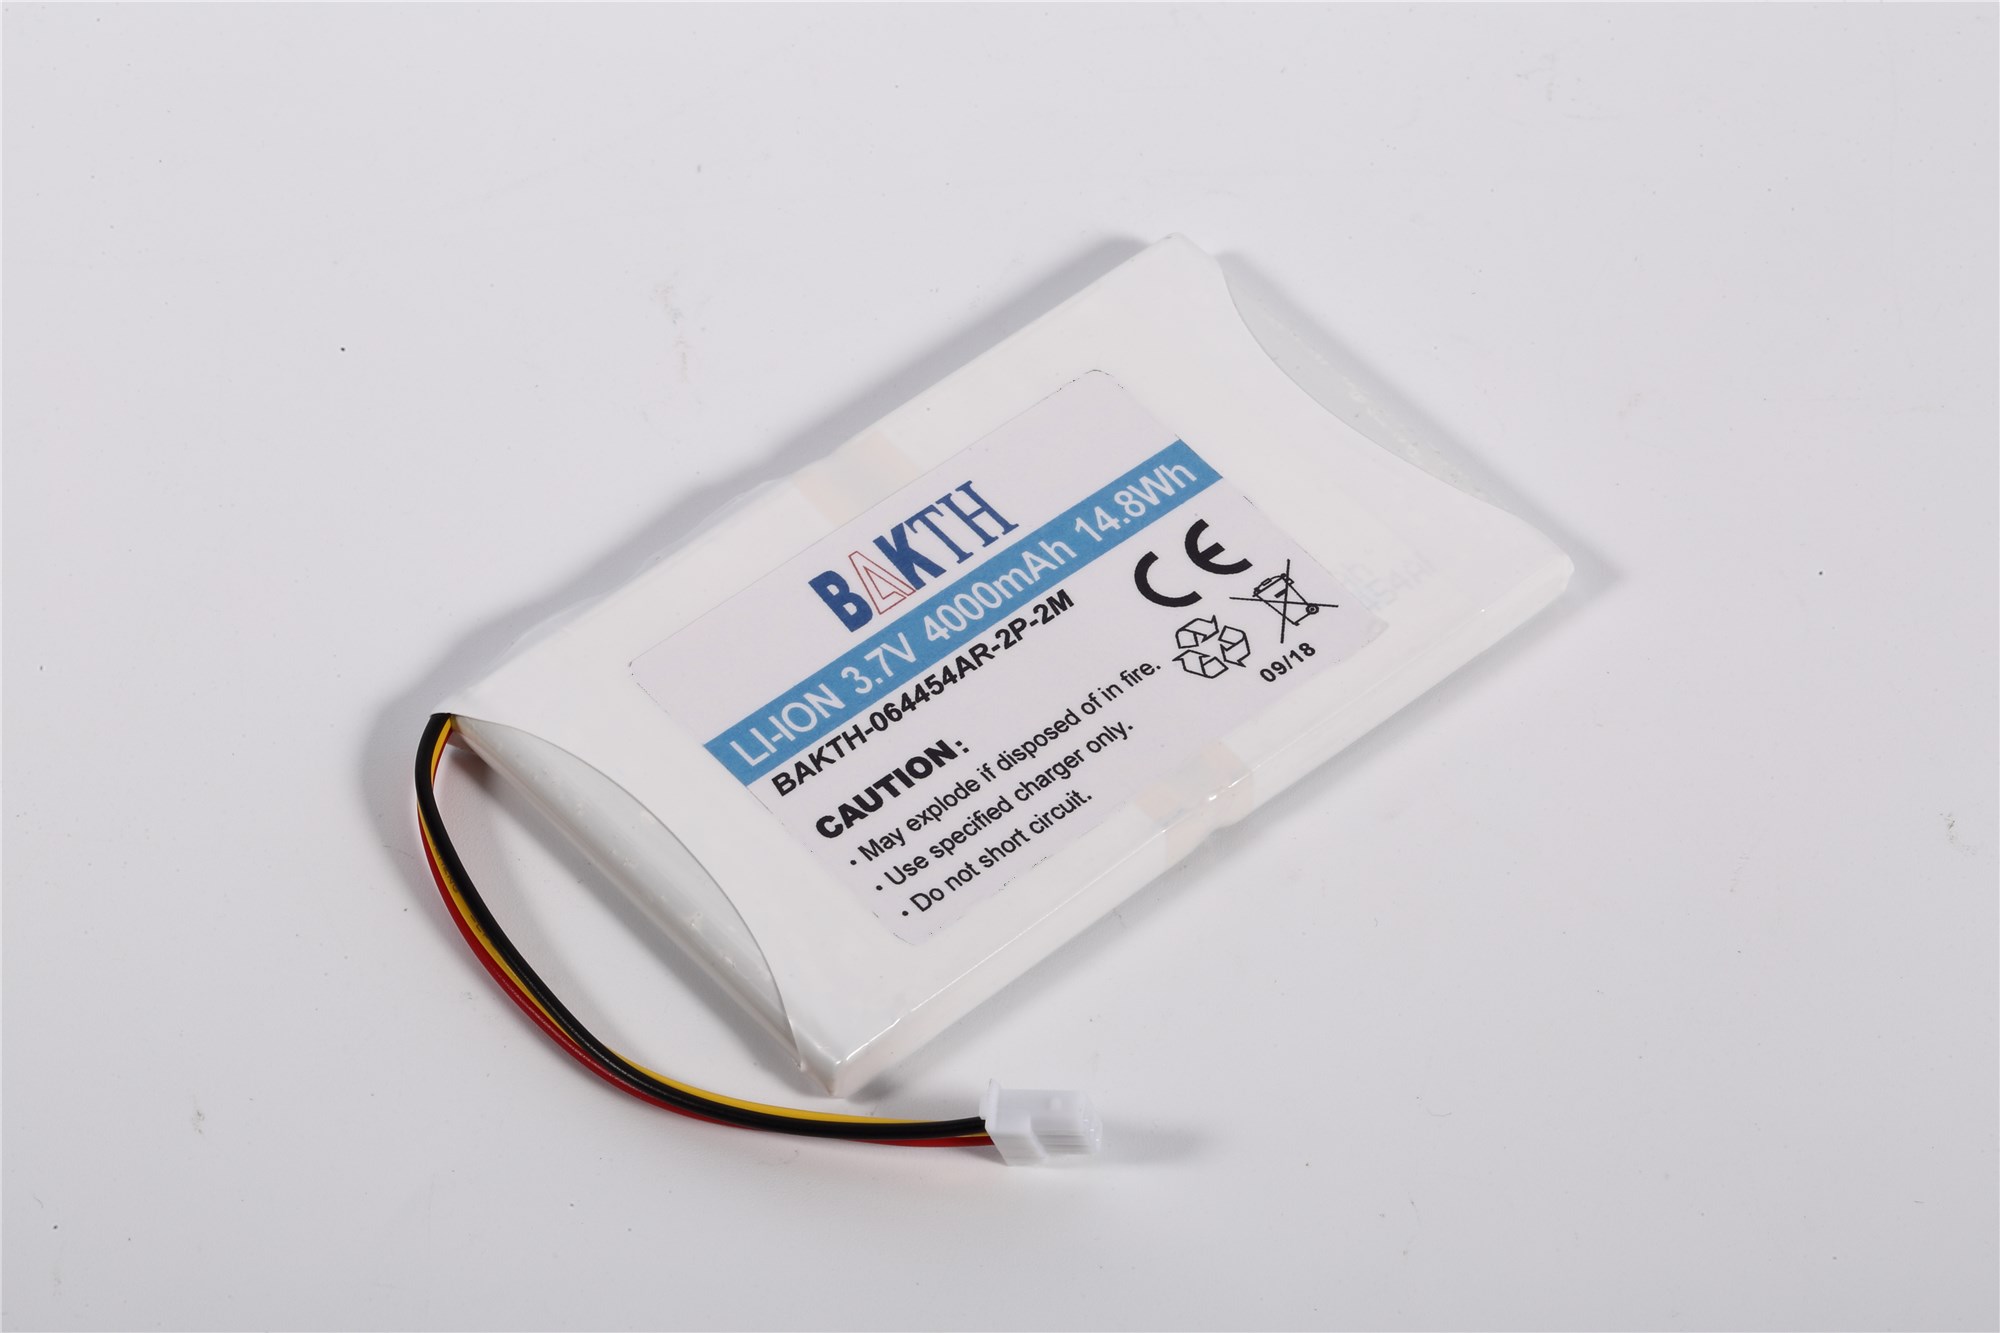 BAKTH-064454-2P-2M Lithium Ion Battery Pack Customized Li-ion Battery Pack